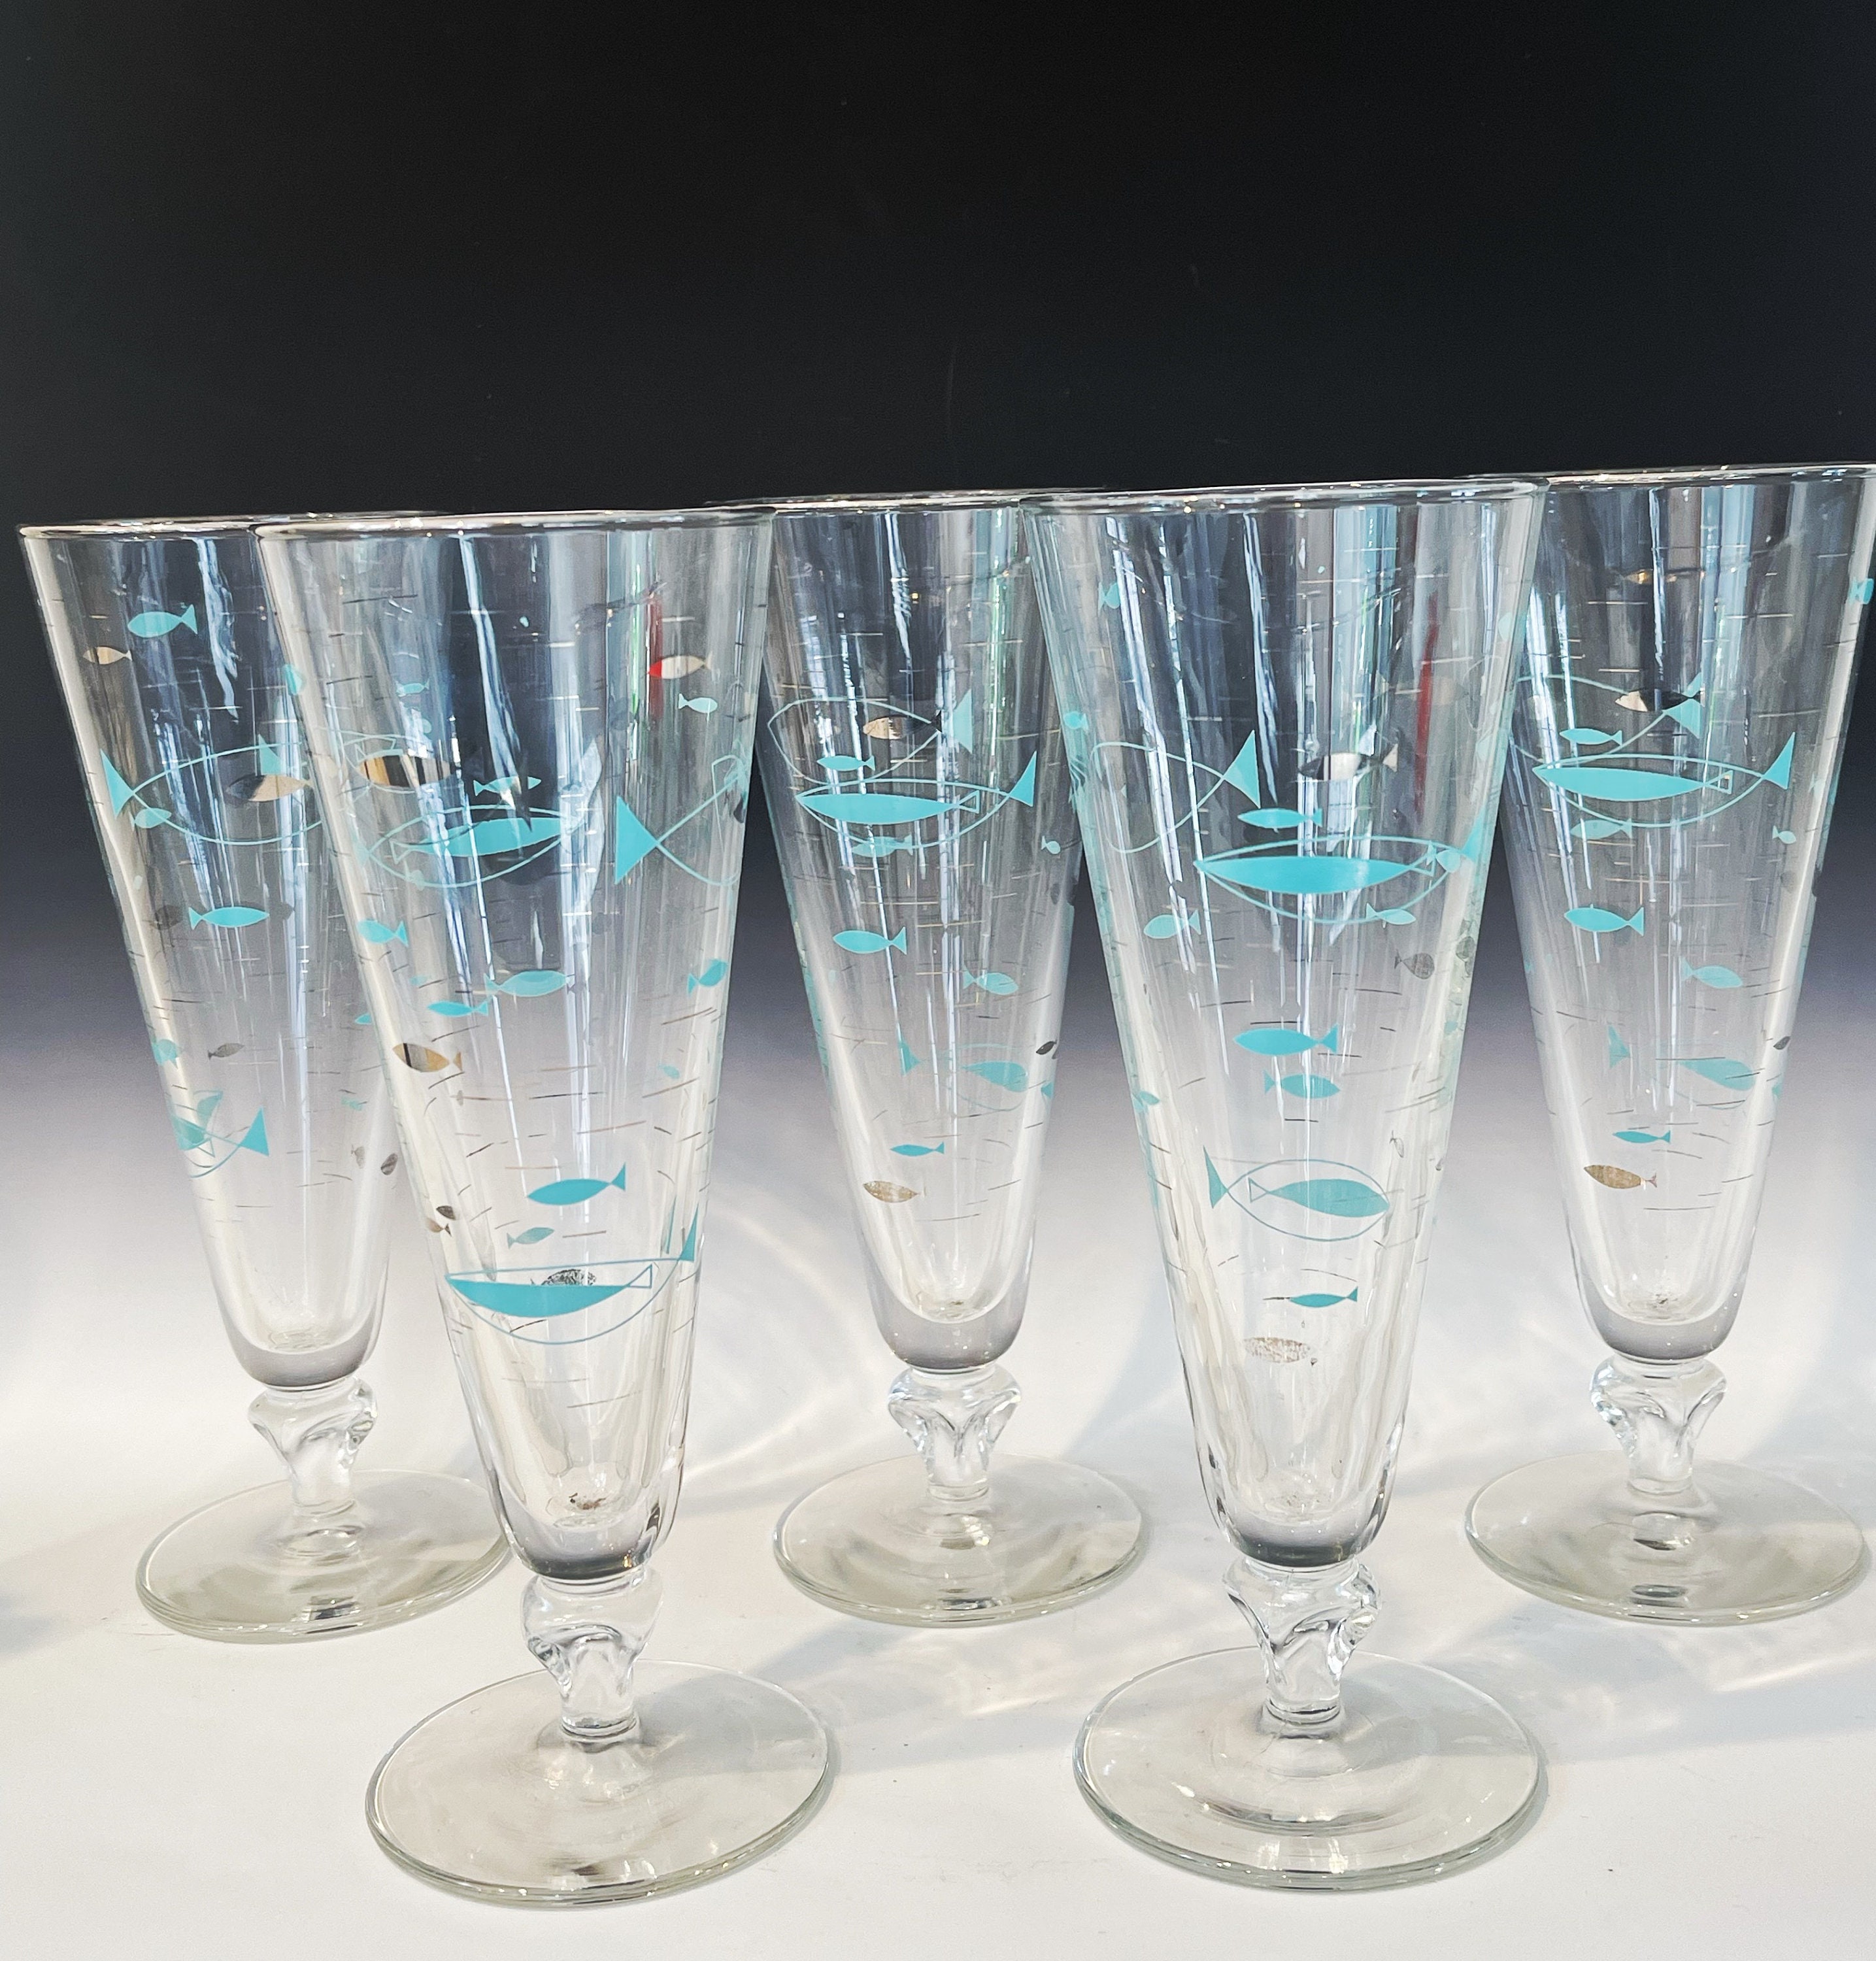 Fish Martini Glasses - set of 4 (or more!) – Once A Tree Camden